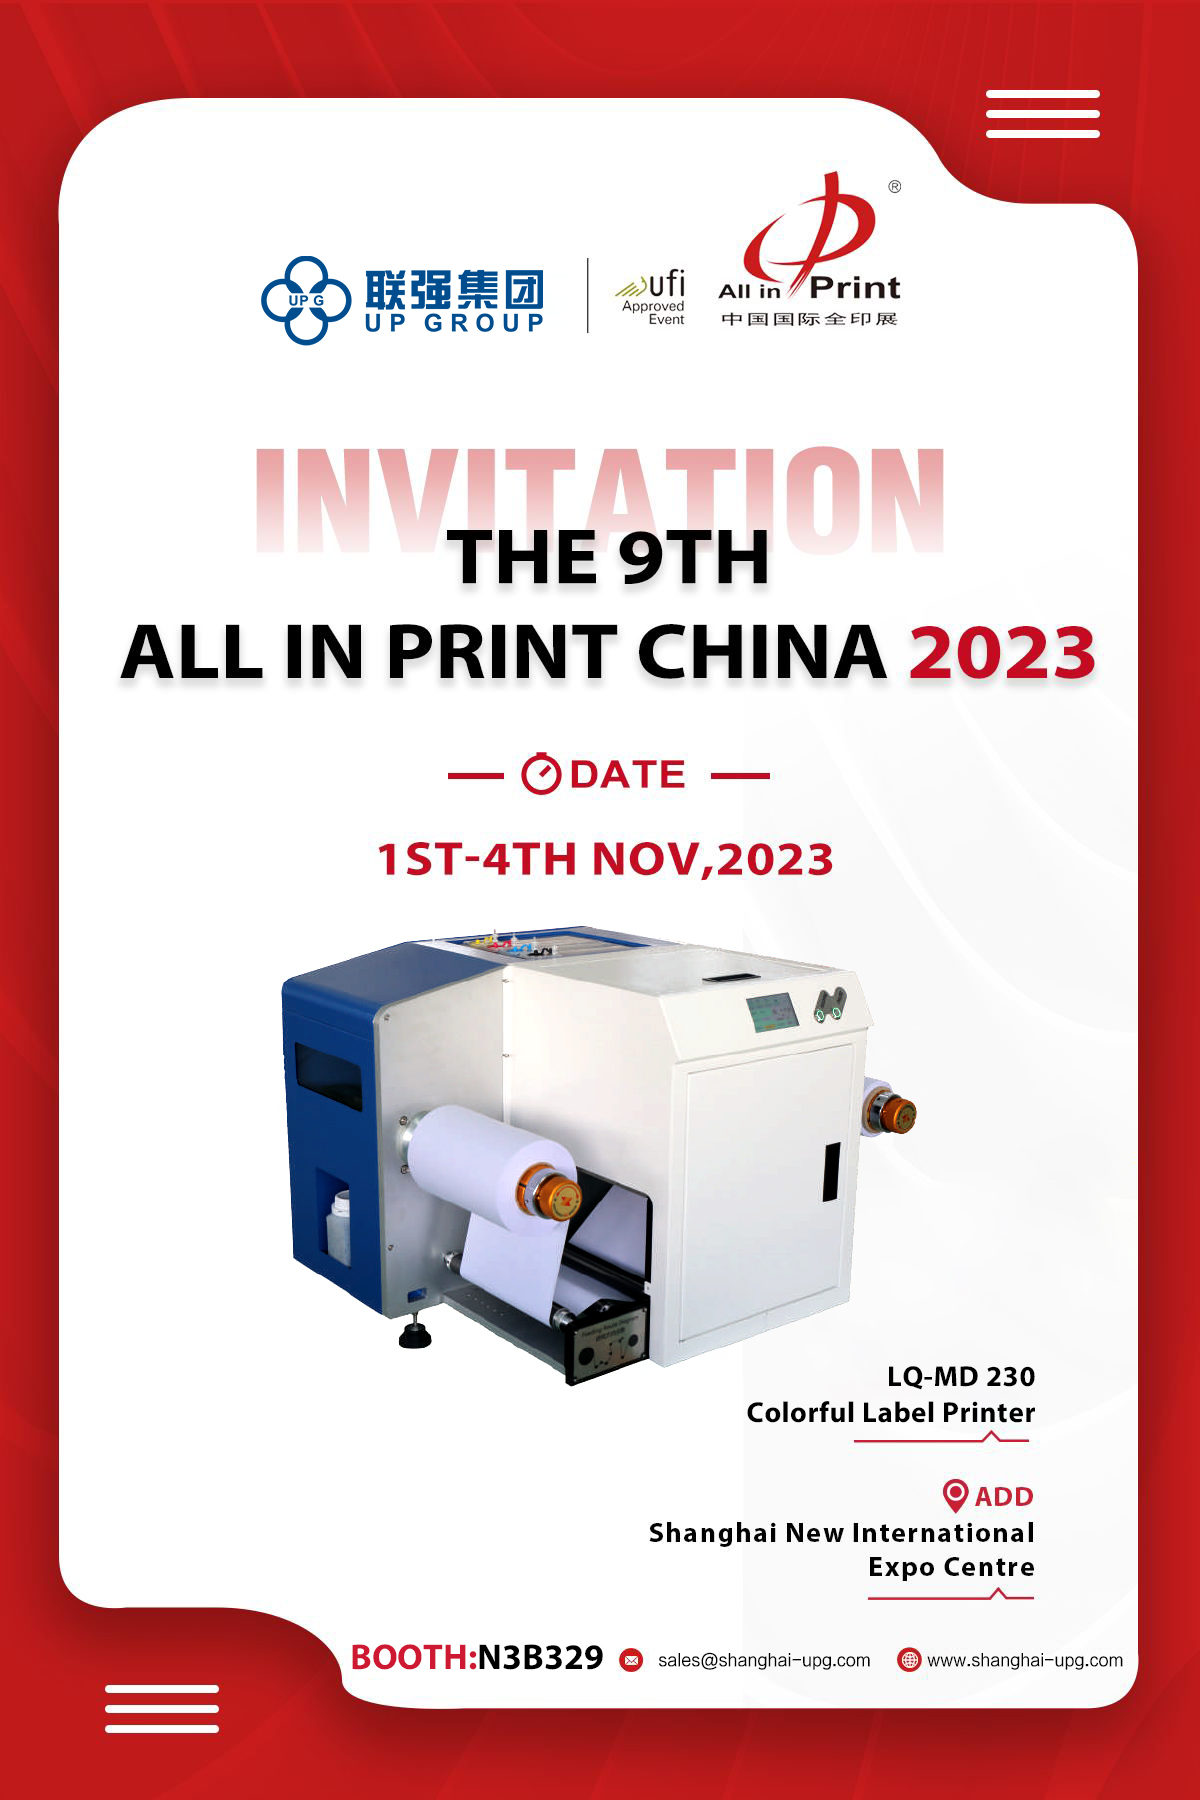 Looking forward to meeting you at All In Print China 2023